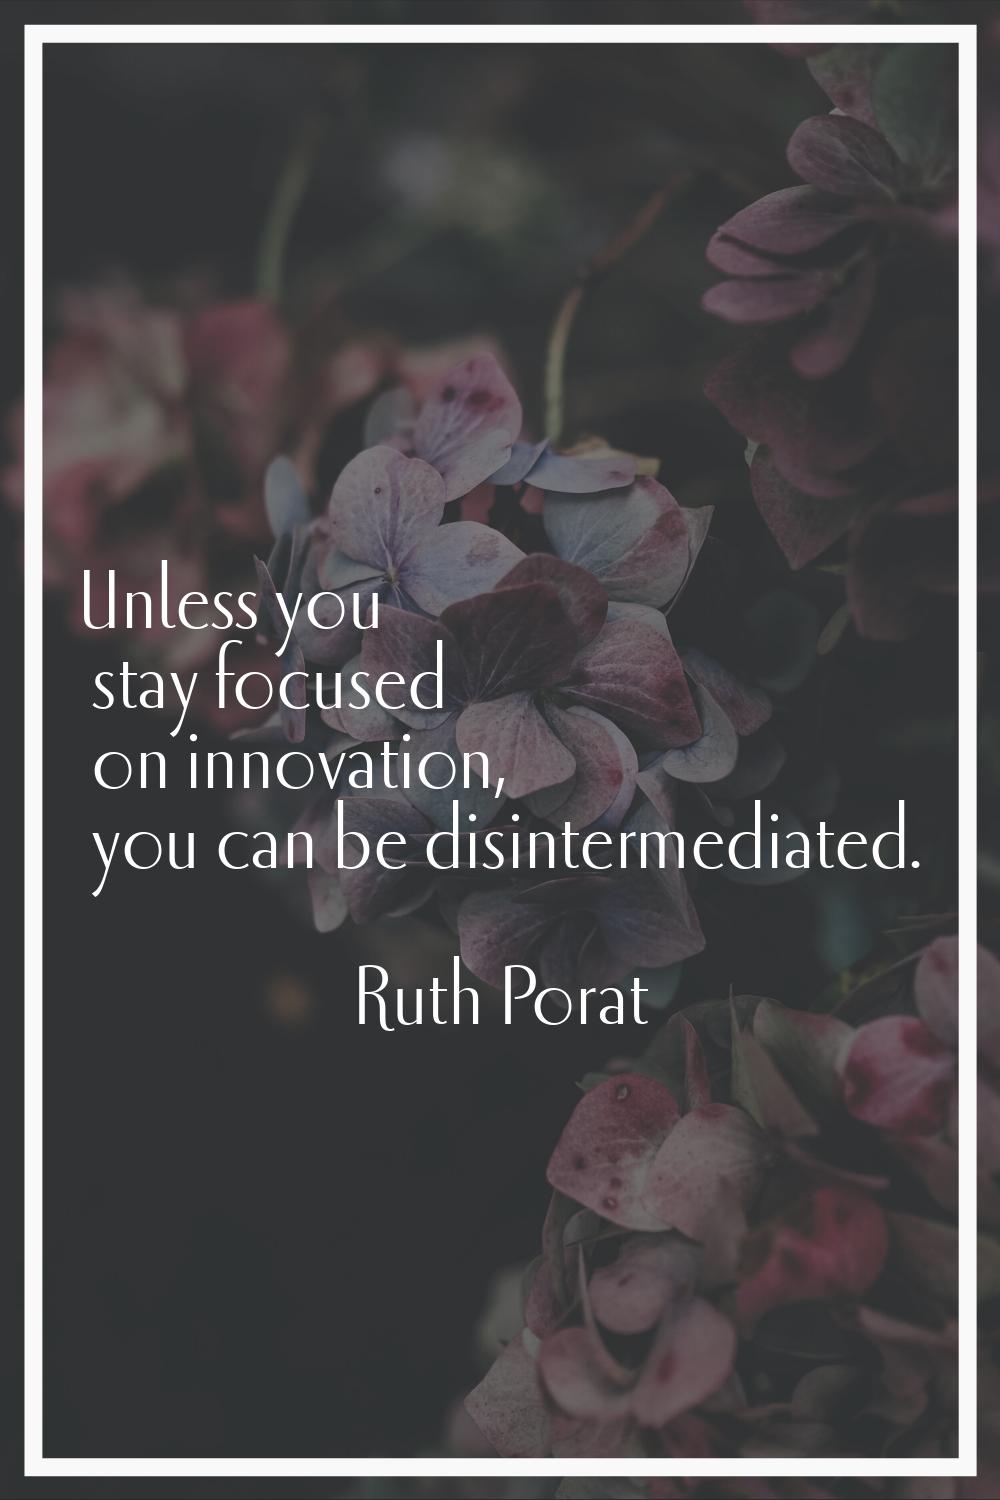 Unless you stay focused on innovation, you can be disintermediated.